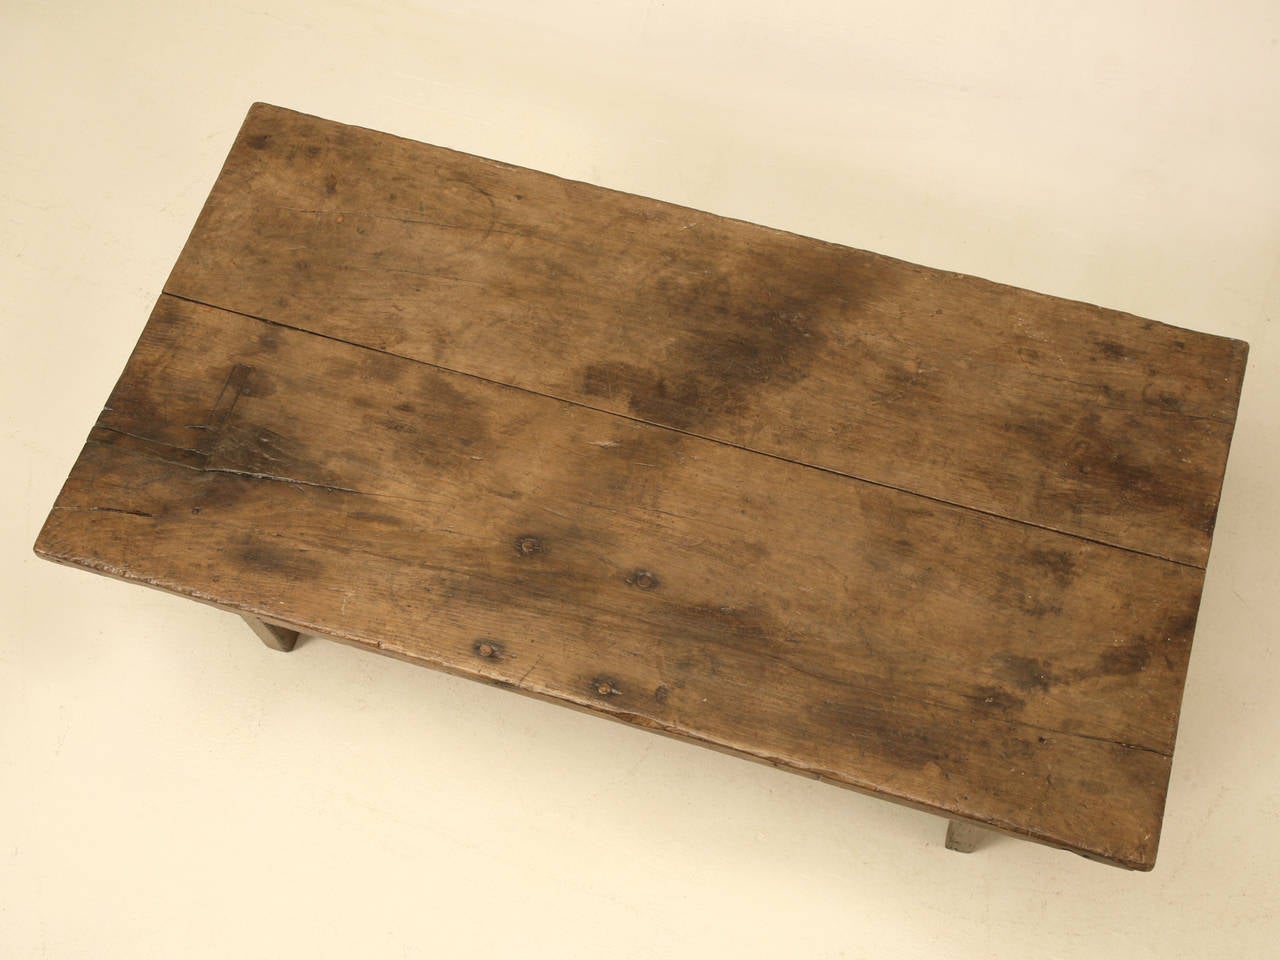 Rustic original French work table with drawer and a wide board top, cut down to coffee table height, circa 1800. It's original 200 year old patina make this antique a must for a family room, weekend retreat, or any other space that could use a bit